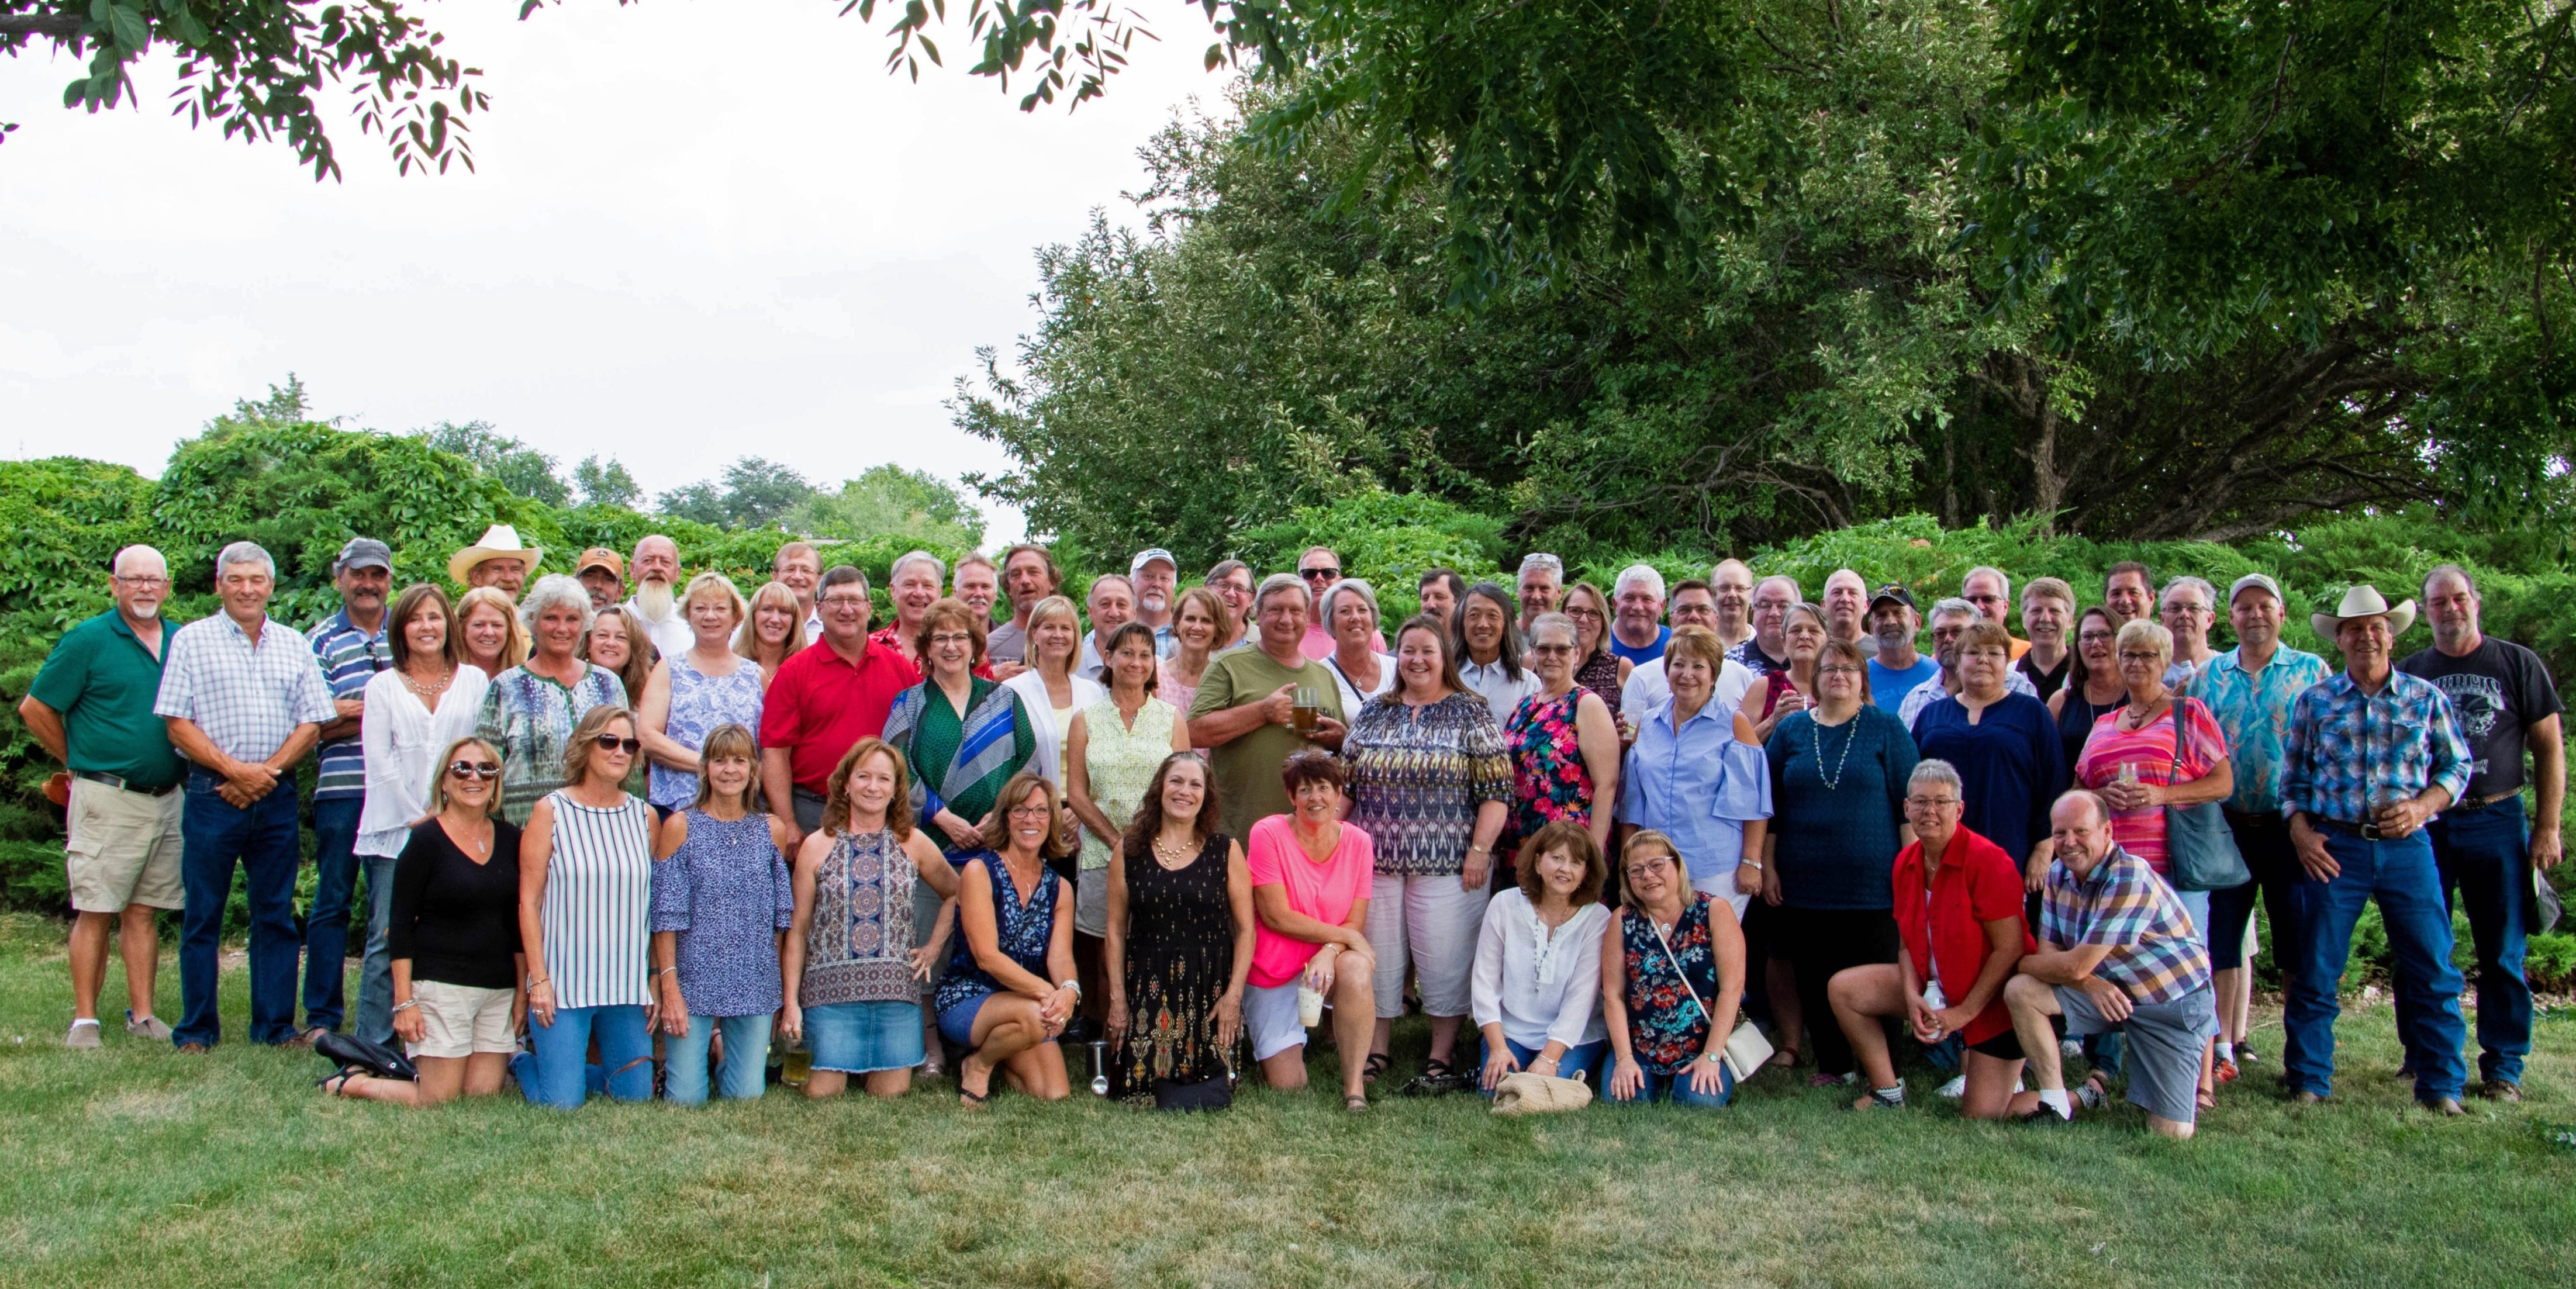 40th Reunion Class Picture - August 4, 2018